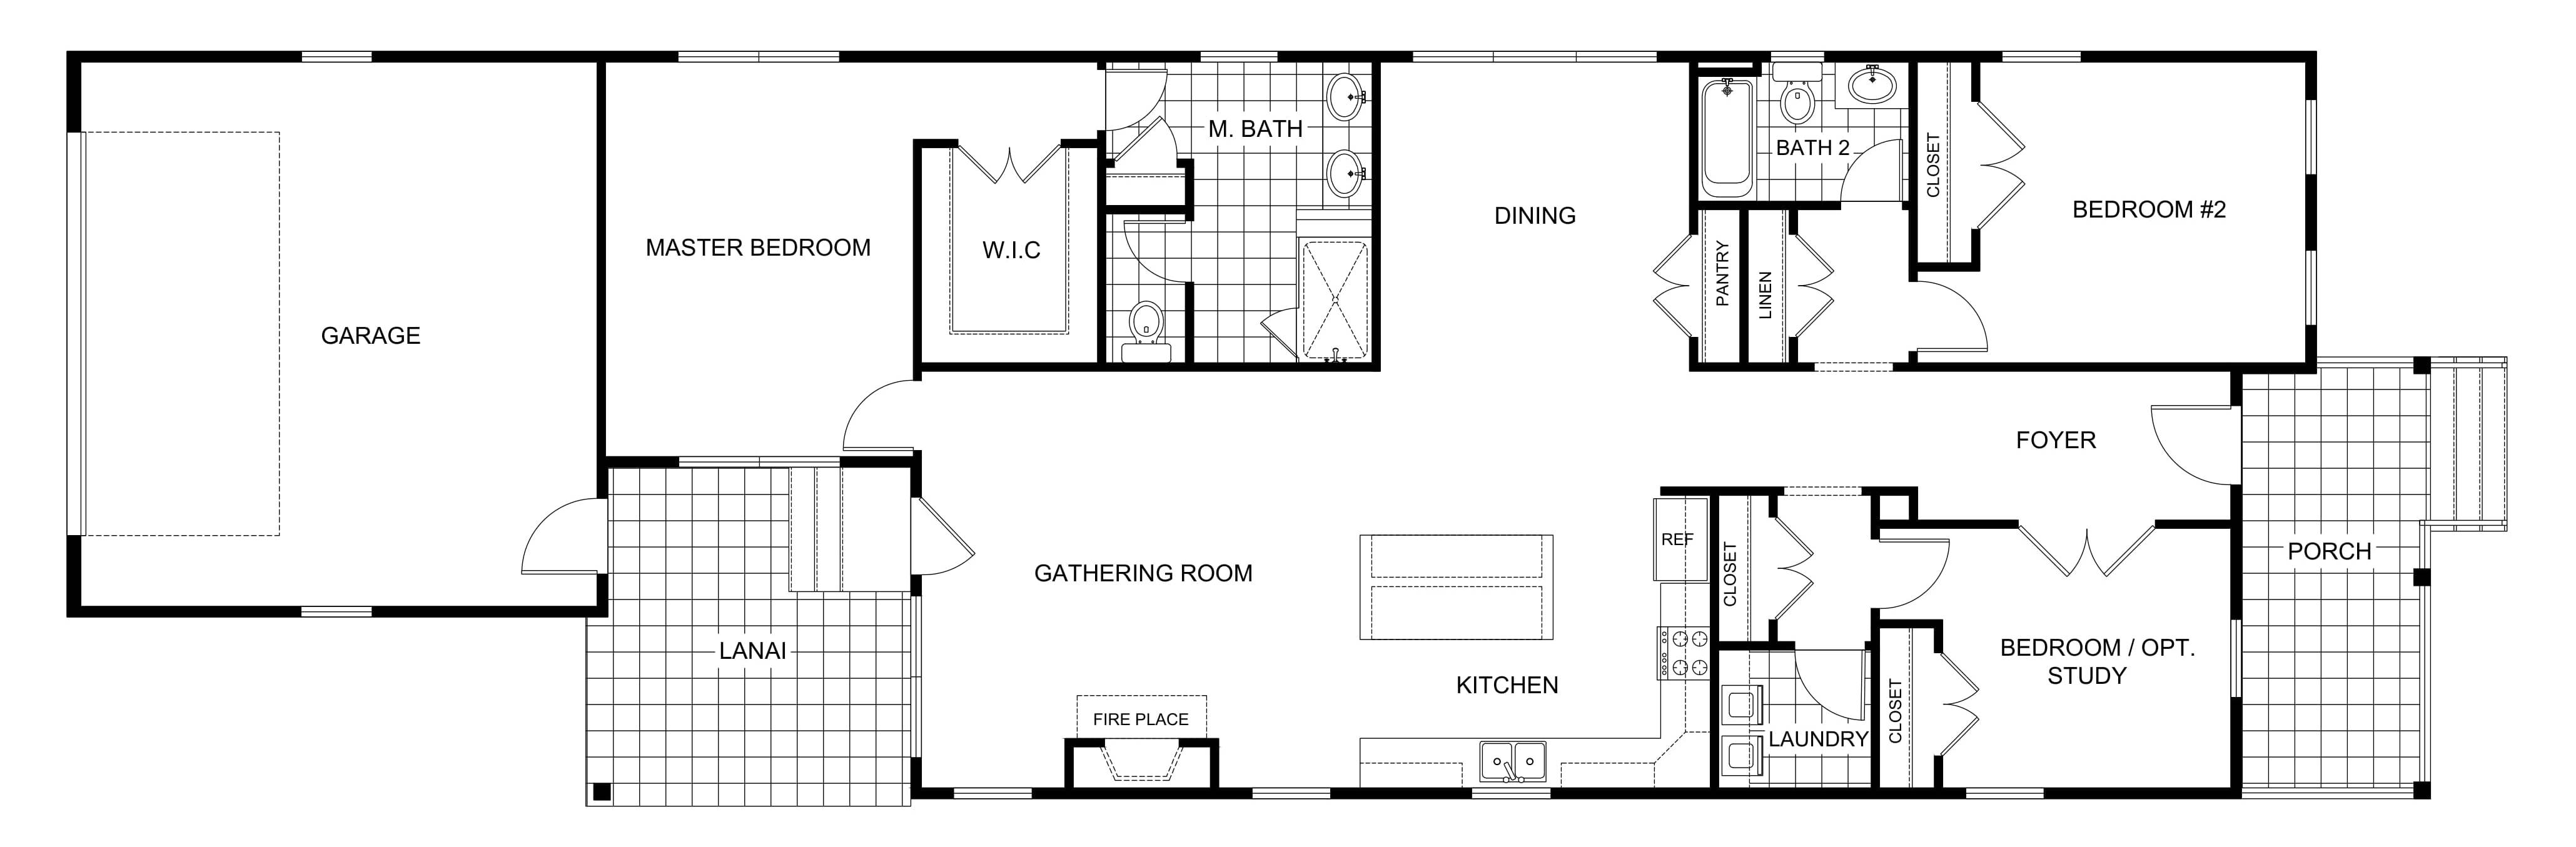 Why 2D Floor Plan Drawings Are Important For Building New